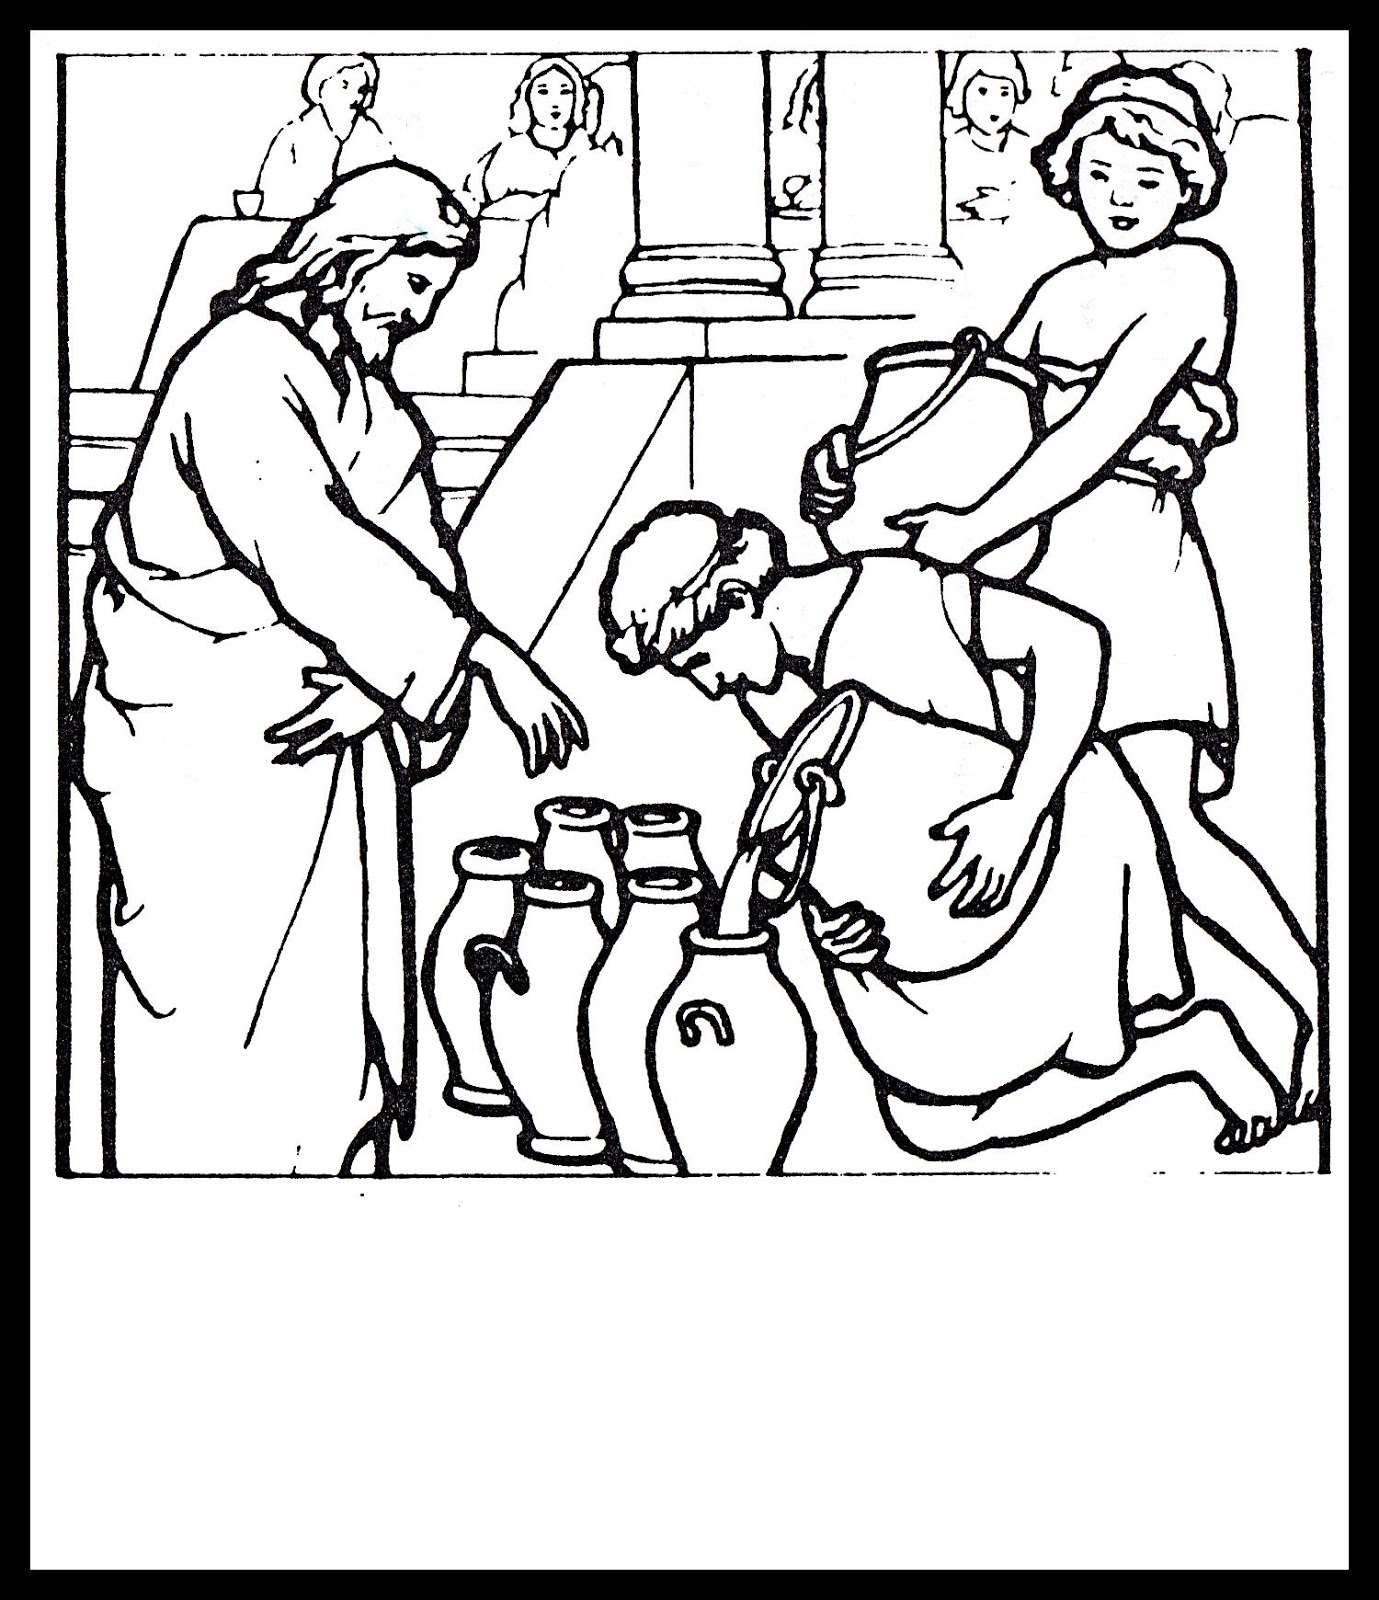 Jesus Turns Water Into Wine Coloring Pages - Coloring Home